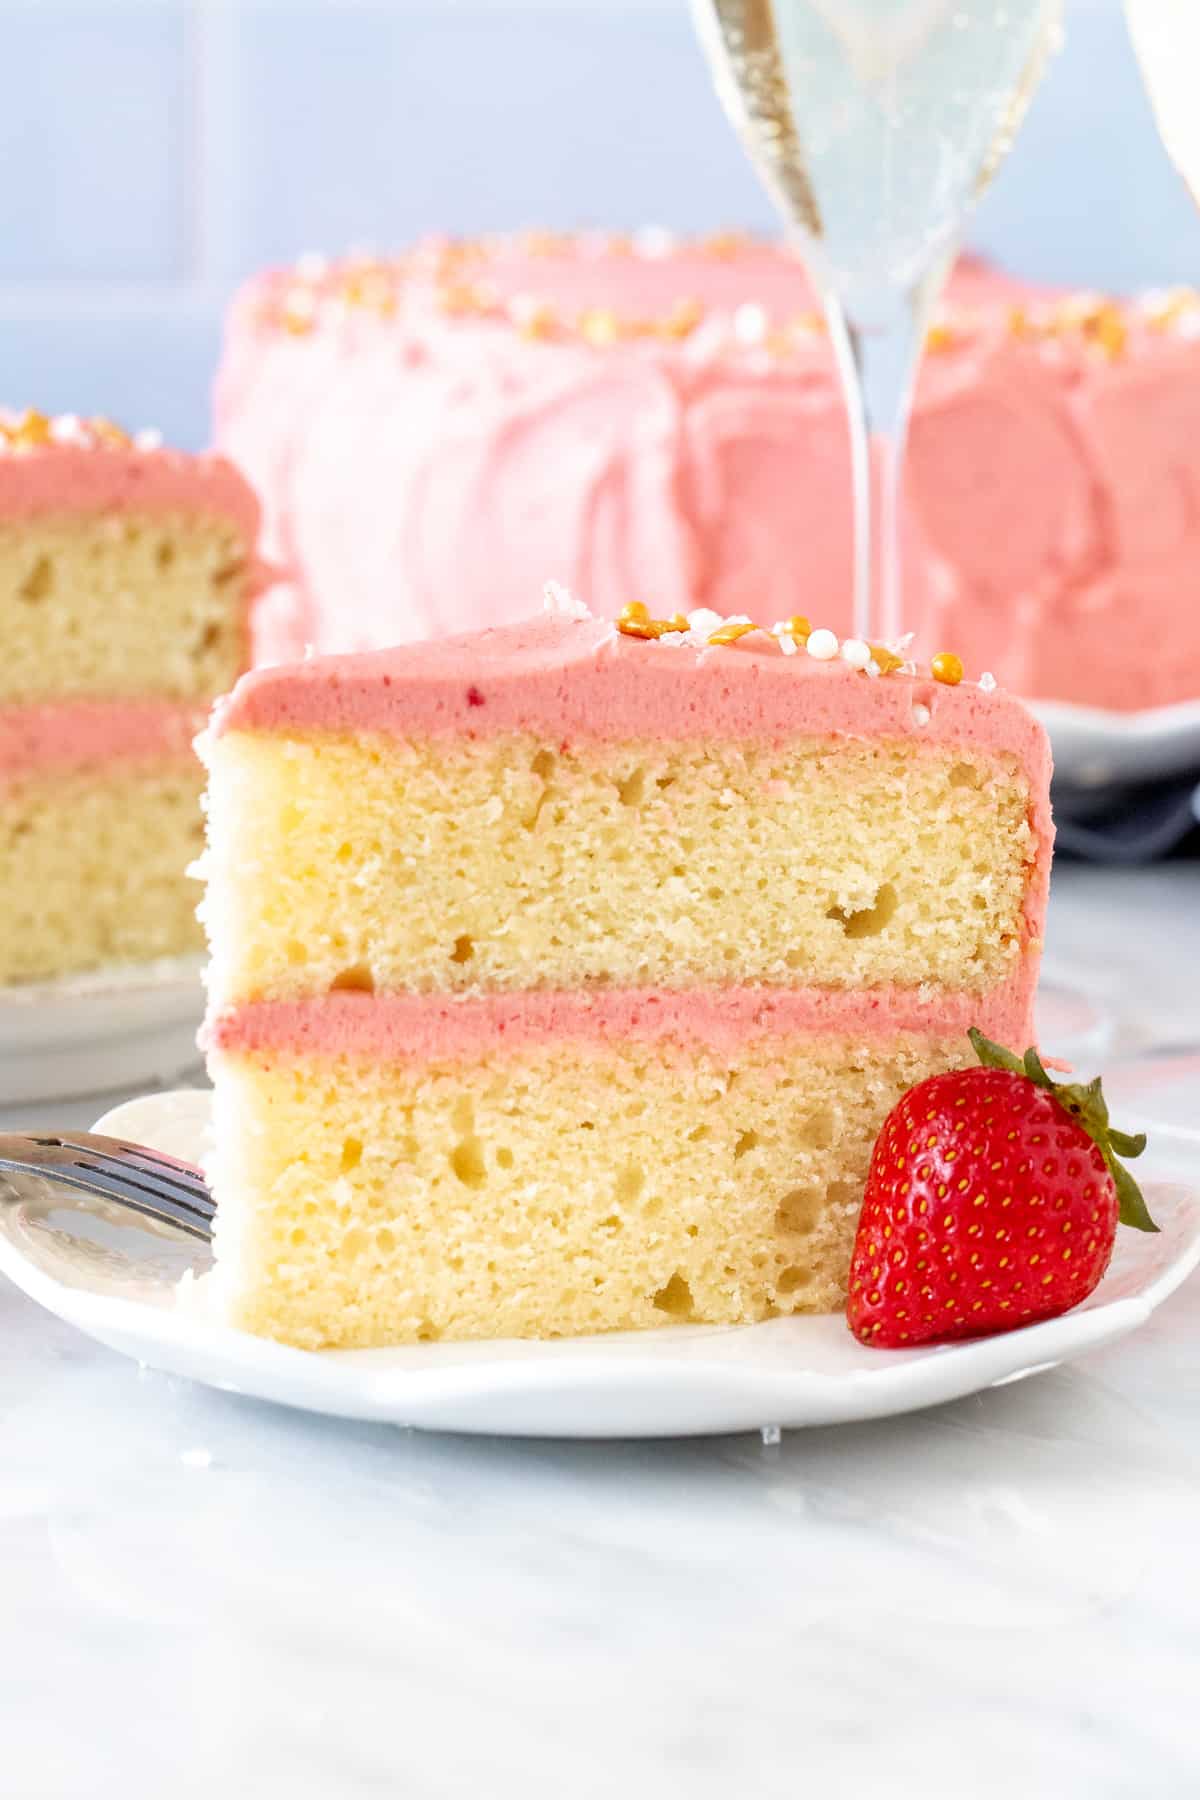 Slice of champagne layer cake with strawberry frosting